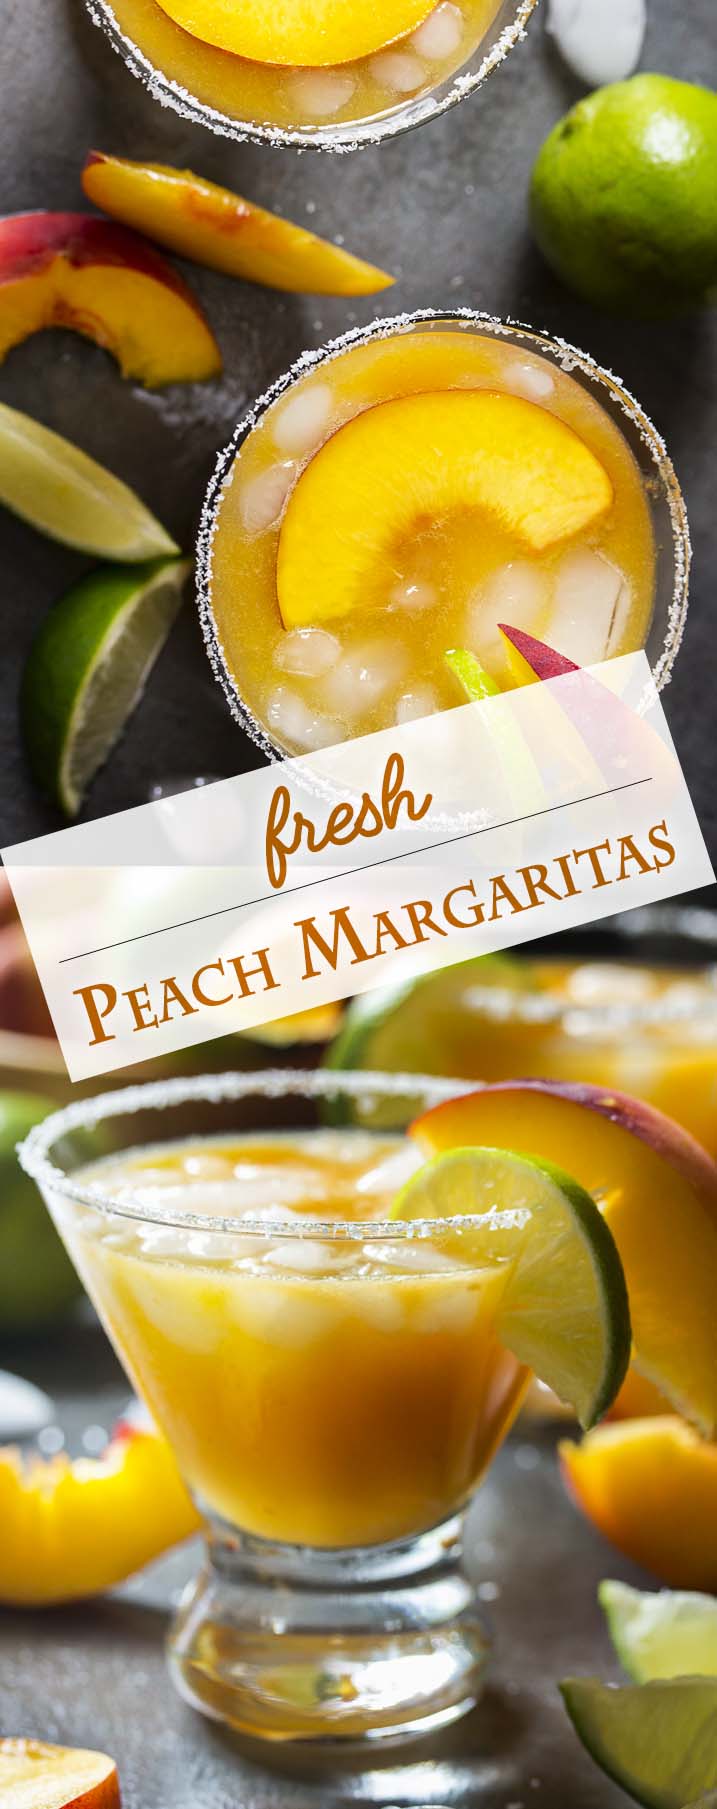 Have some overripe peaches on the counter? Puree them up into an intensely peachy and not too sweet fresh peach margarita on the rocks! | justalittlebitofbacon.com